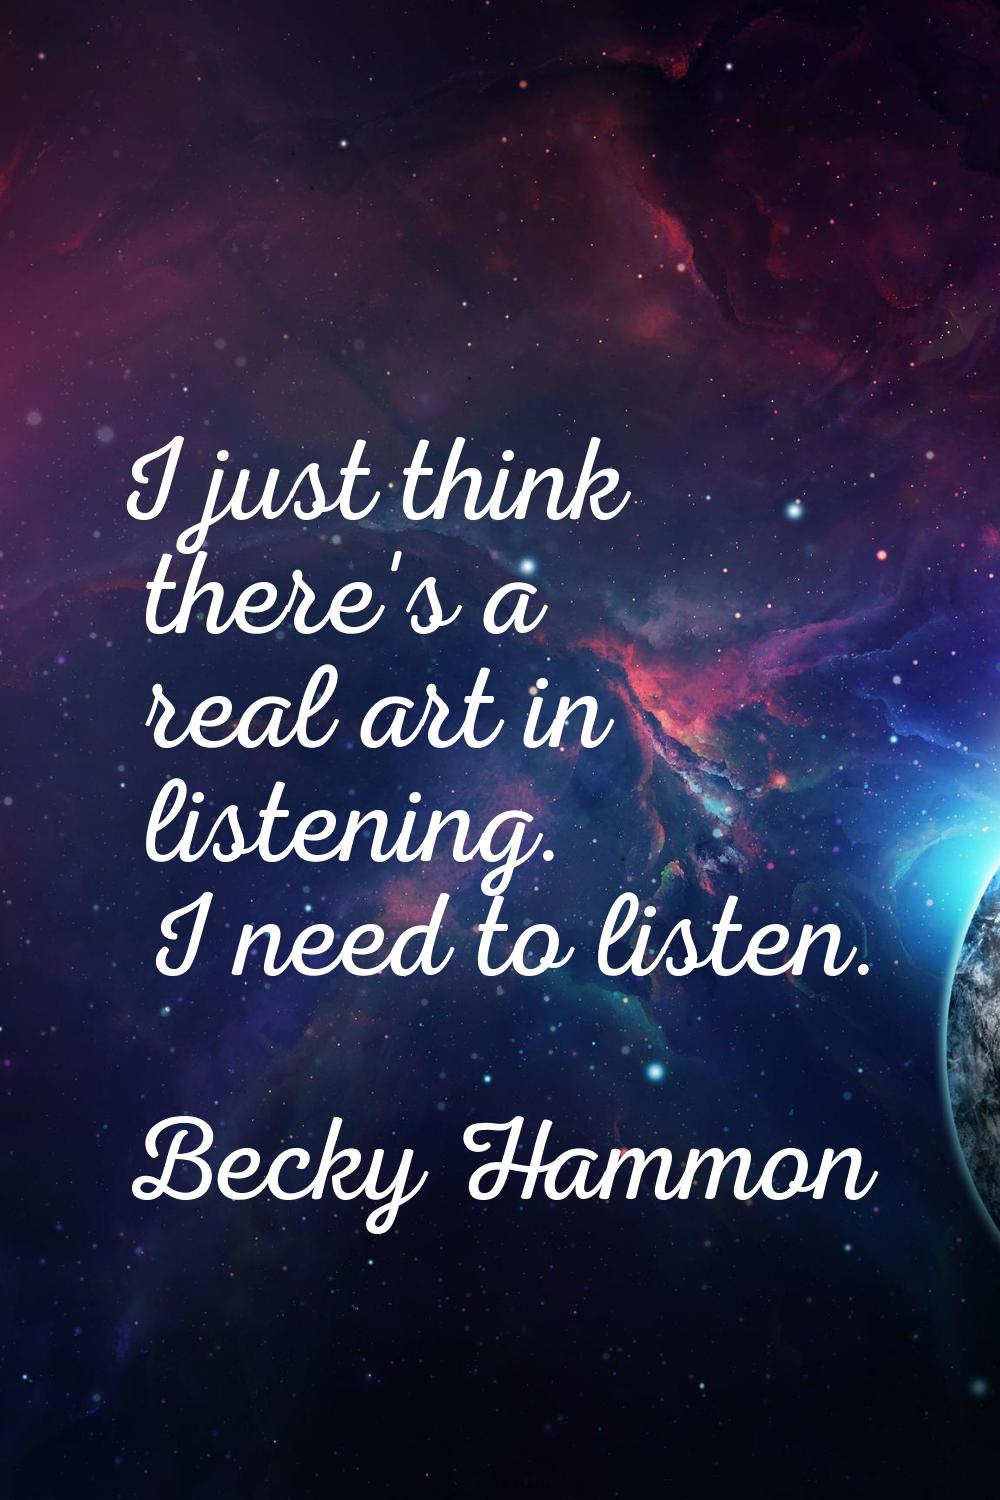 I just think there's a real art in listening. I need to listen.